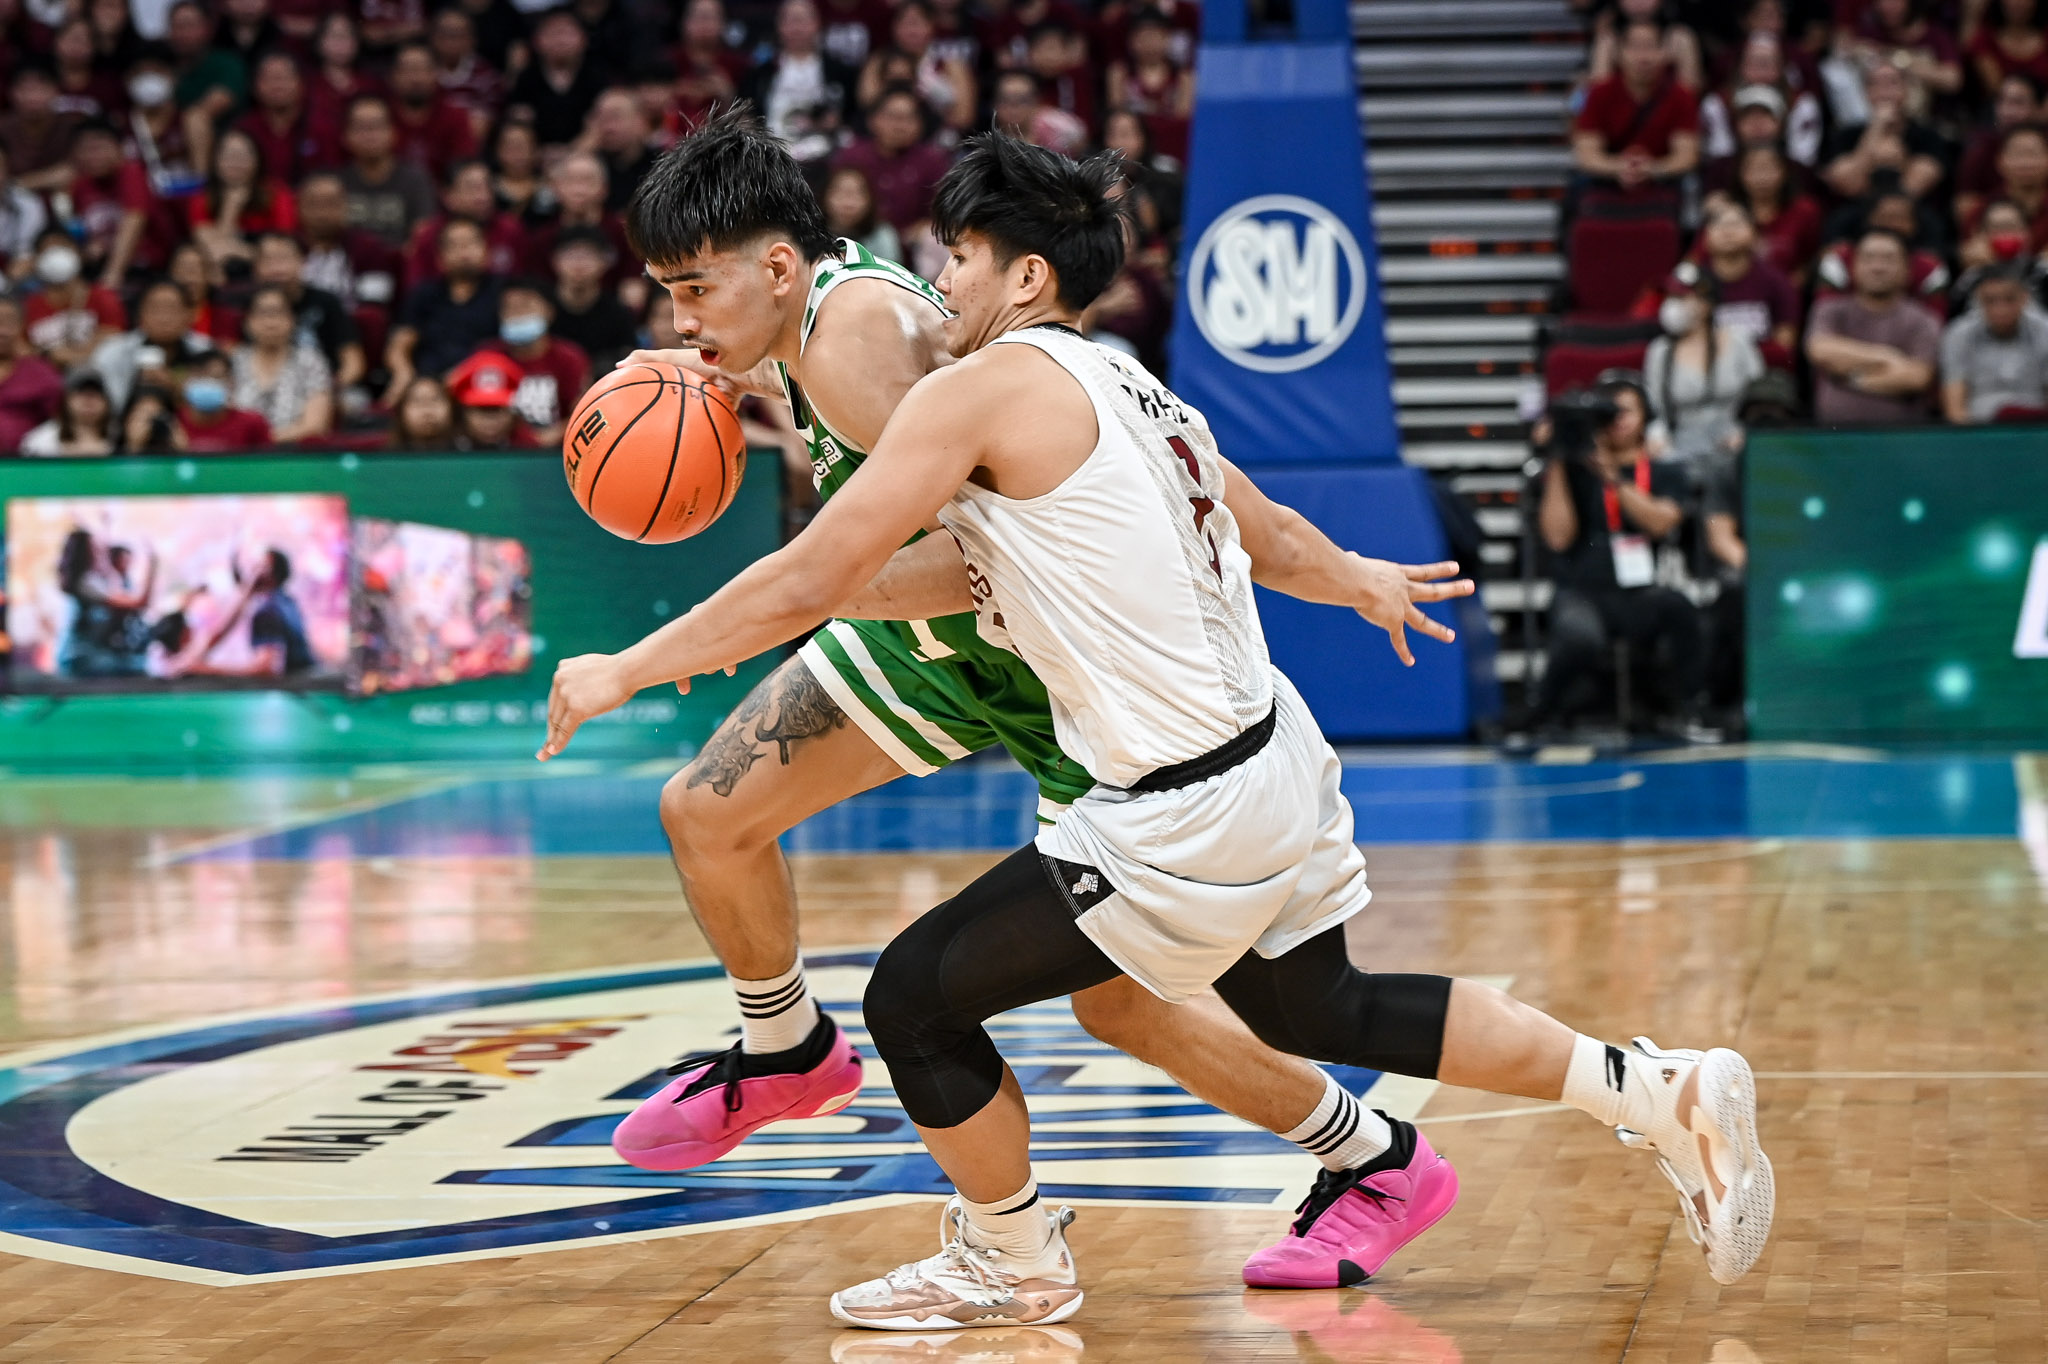 UAAP86-MBB-UP-vs-DLSU-KEVIN-QUIAMBAO-7272 Reyland Torres puts clamps on good pal Kevin Quiambao in Game 1 Basketball News UAAP UP  - philippine sports news